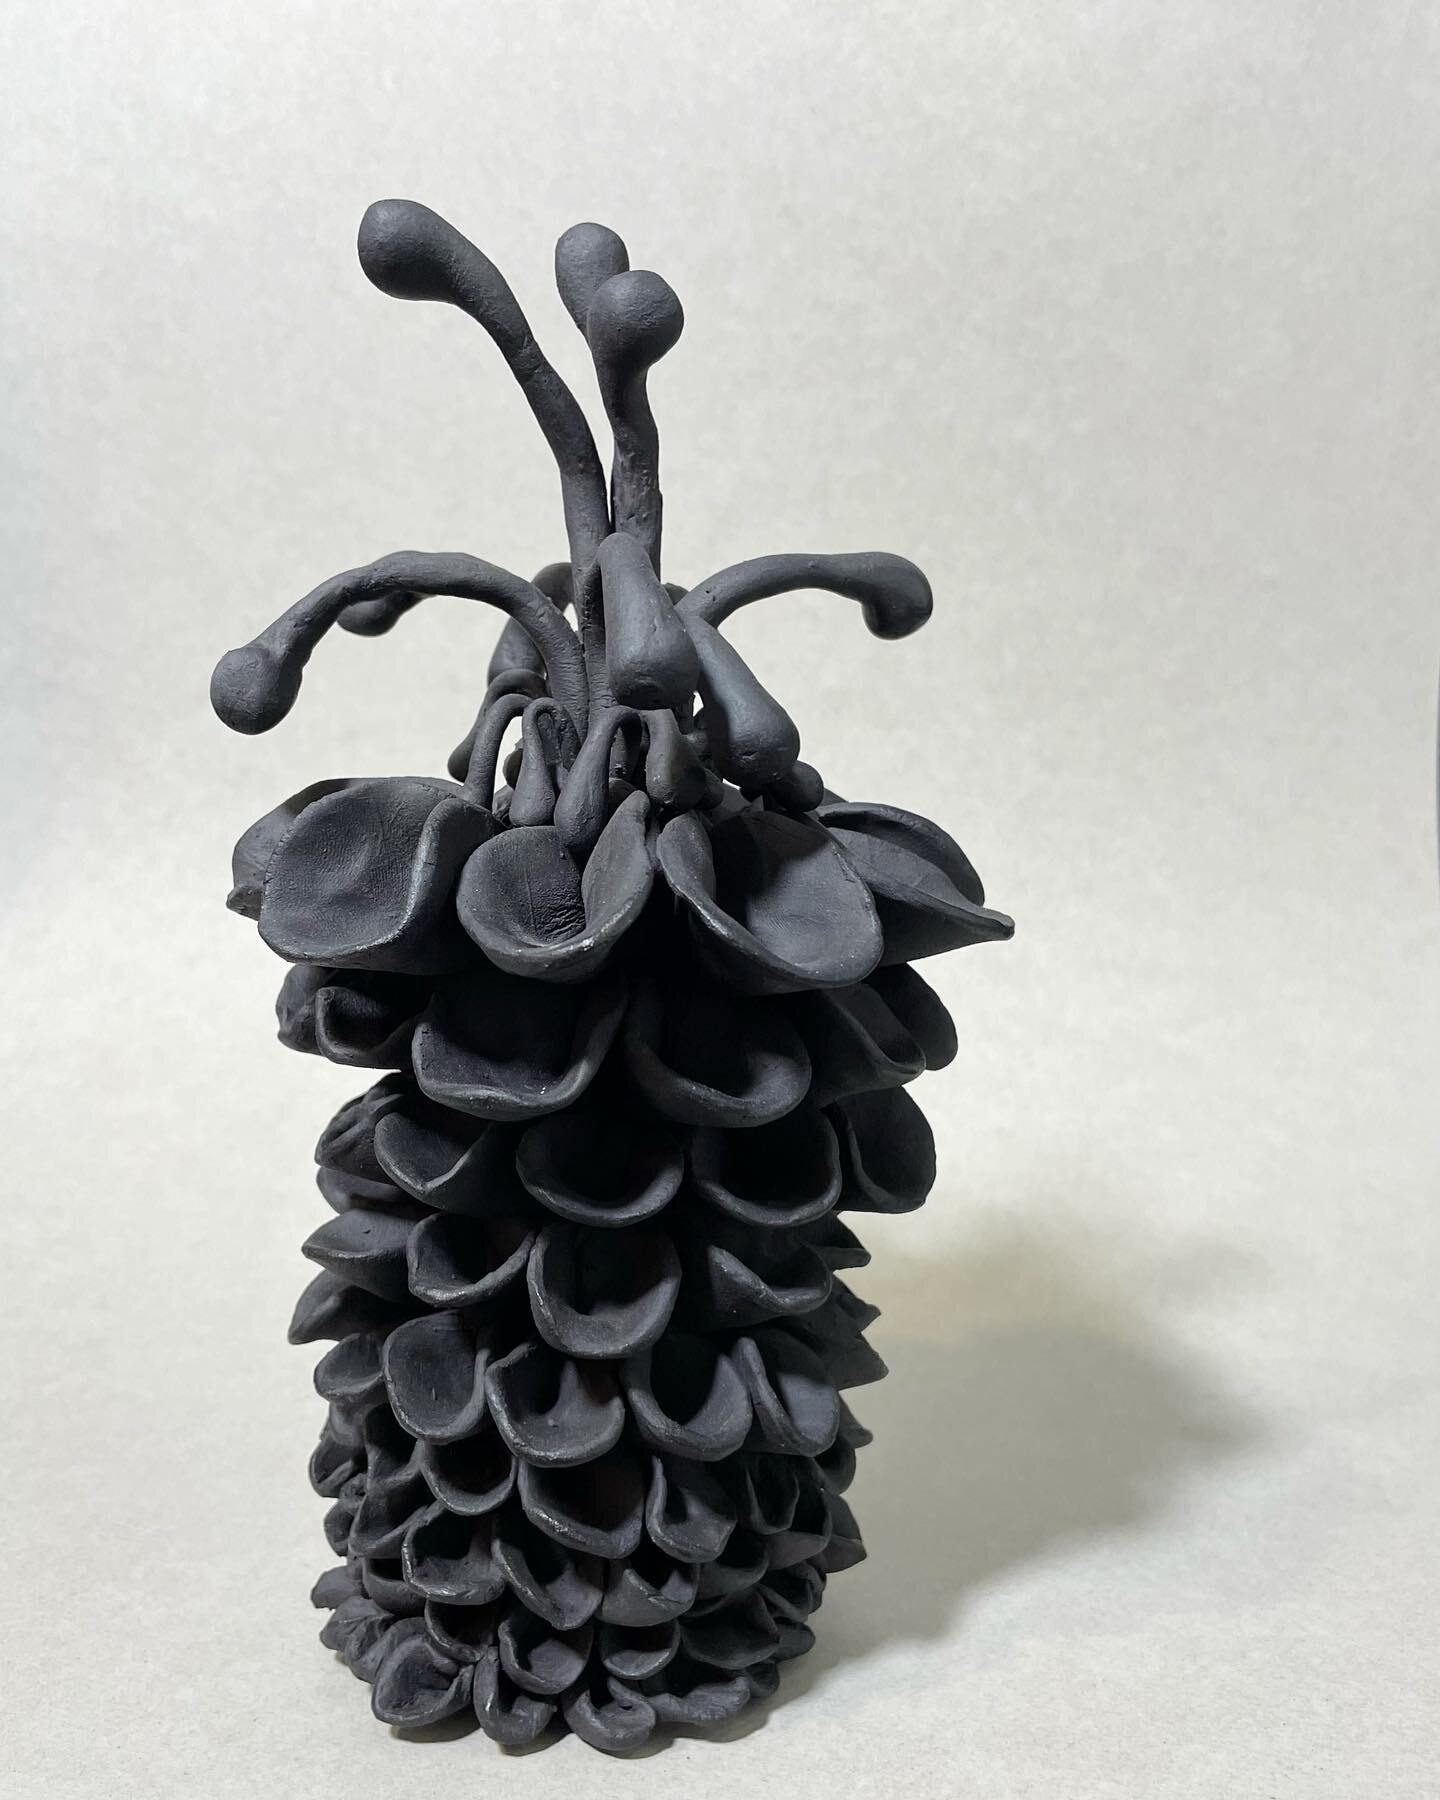 Petal palm plant. 
Inspired by flora.
Black clay. 
Approx 22x15cm.
DM for enquiries.

#hybrid #bespoke #unique #handmade #oneofakind #contemporaryart  #clayart  #potterystudio #handcrafted #home #architecture #pottery #potterylife #ceramicdesign #cer